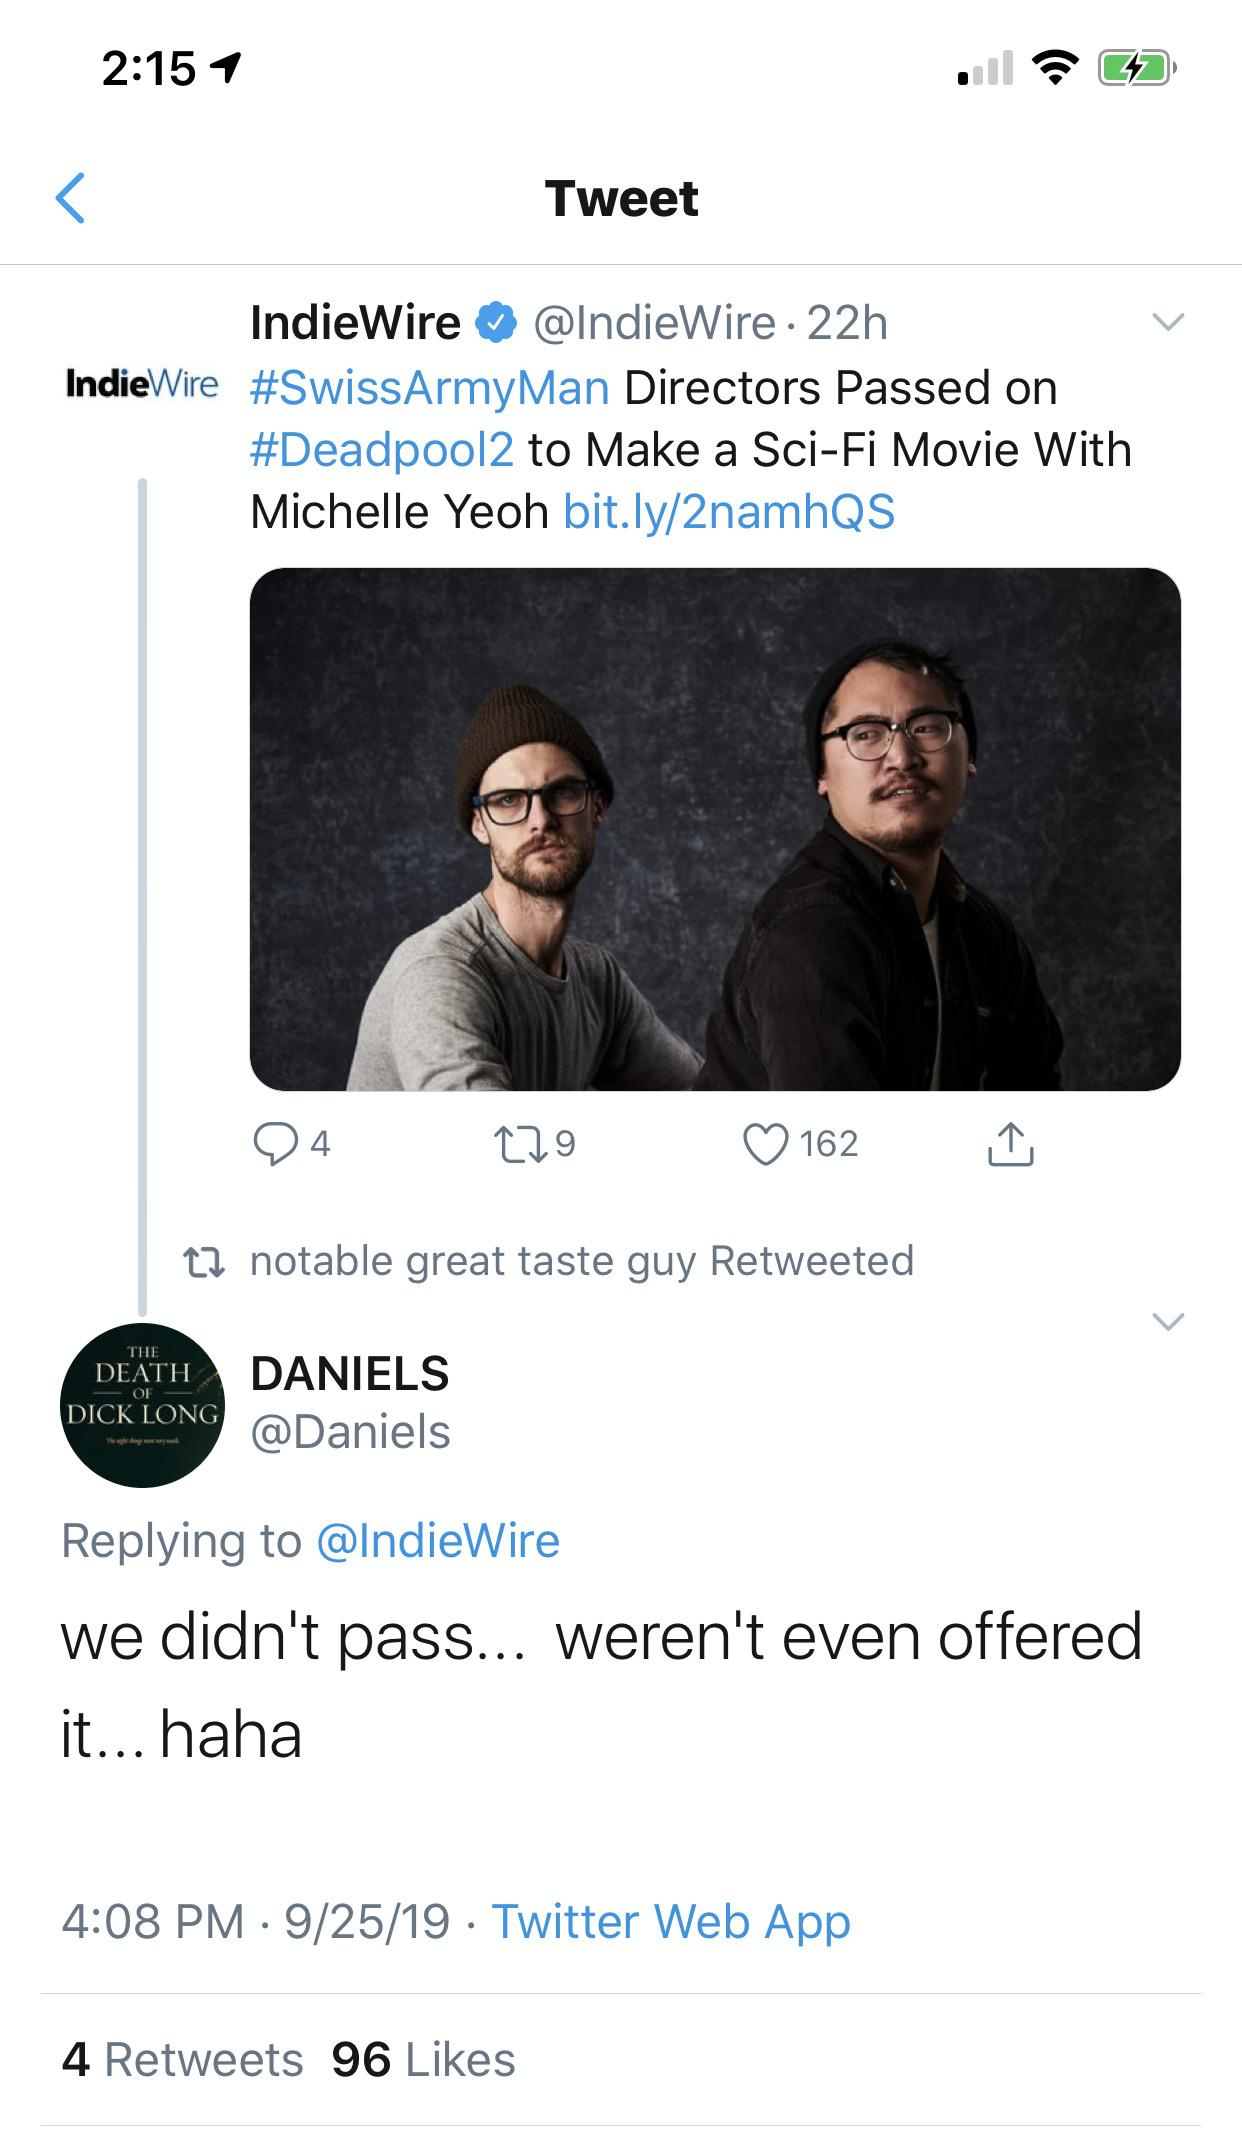 website - Tweet IndieWire 22h IndieVire Man Directors Passed on to Make a SciFi Movie With Michelle Yeoh bit.ly2namhos to notable great taste guy Retweeted exam Daniels we didn't pass... weren't even offered it... haha 92519. Twitter Web App 4 96